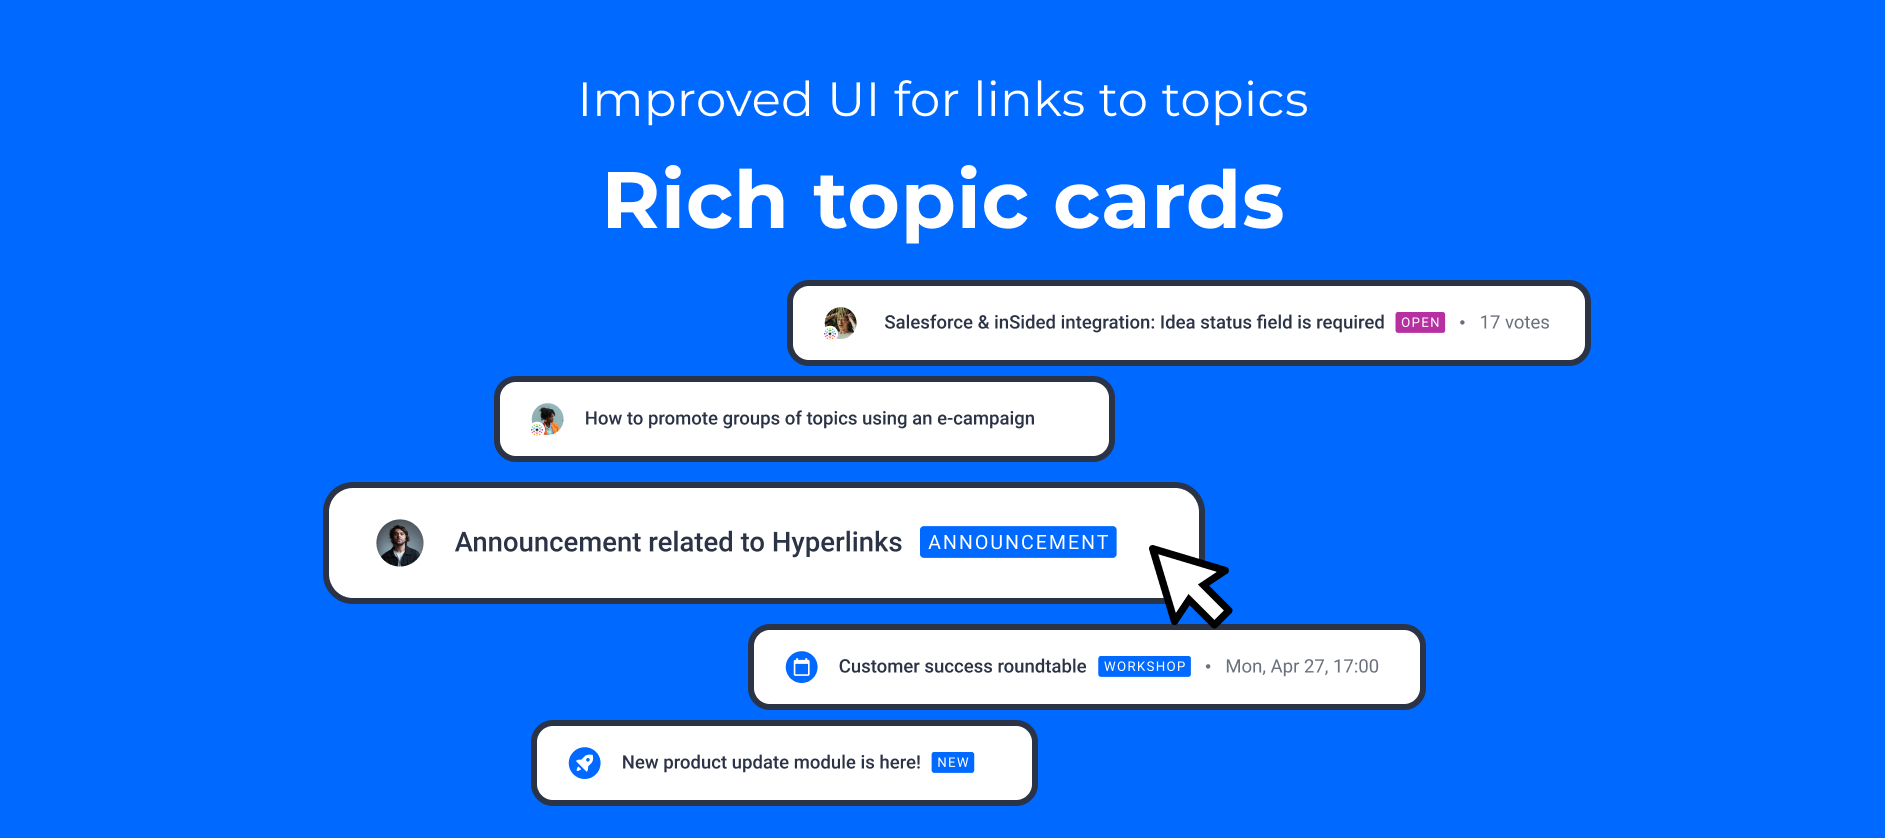 🔗 Improved UI for links to topics: Meet Rich topic cards